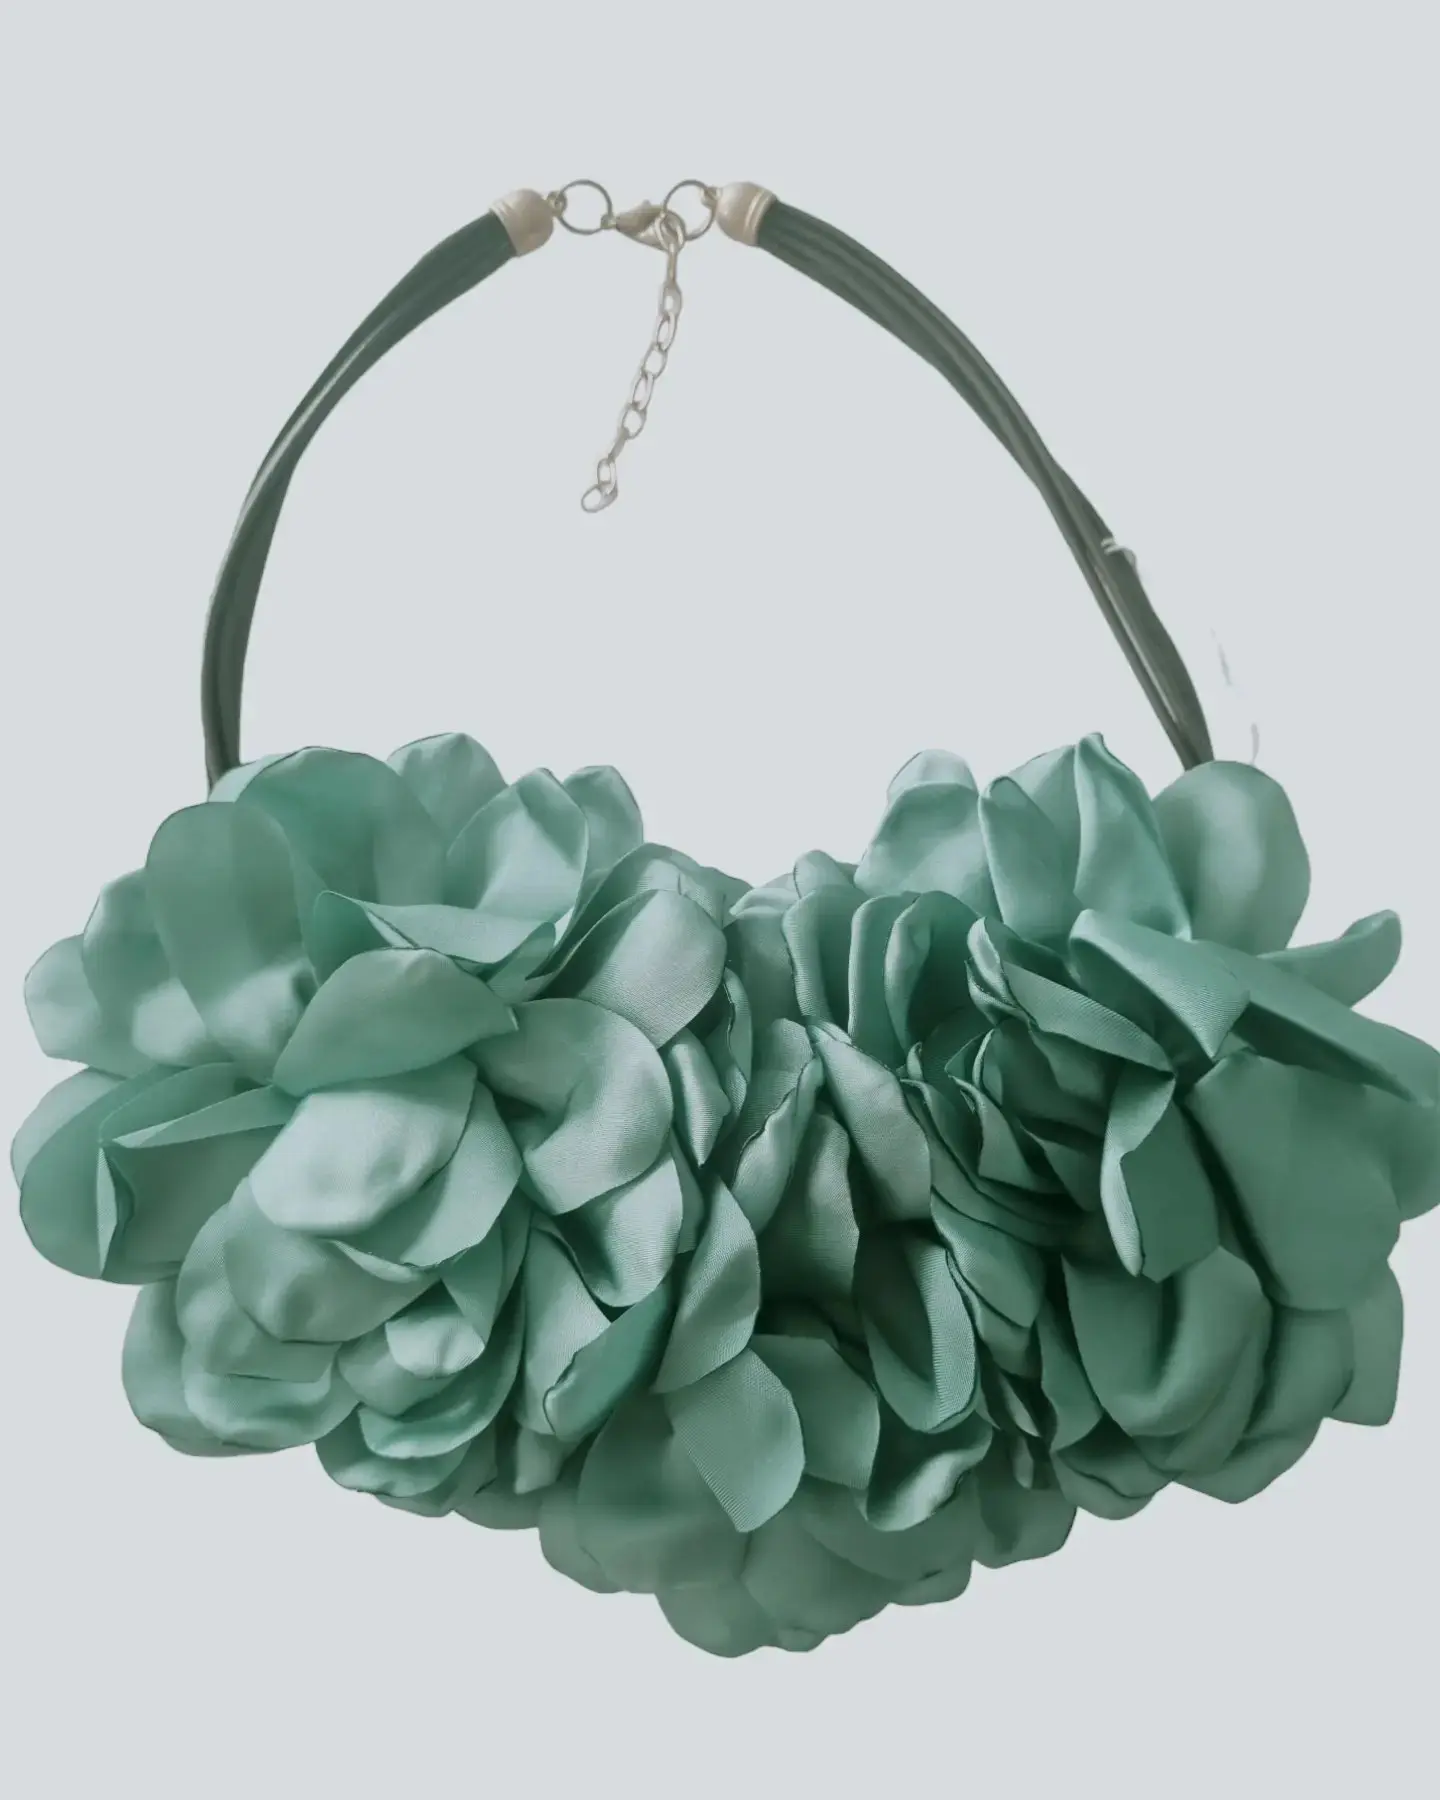 Choker necklace made with fabric flowers. Adjustable length 58cm Green color